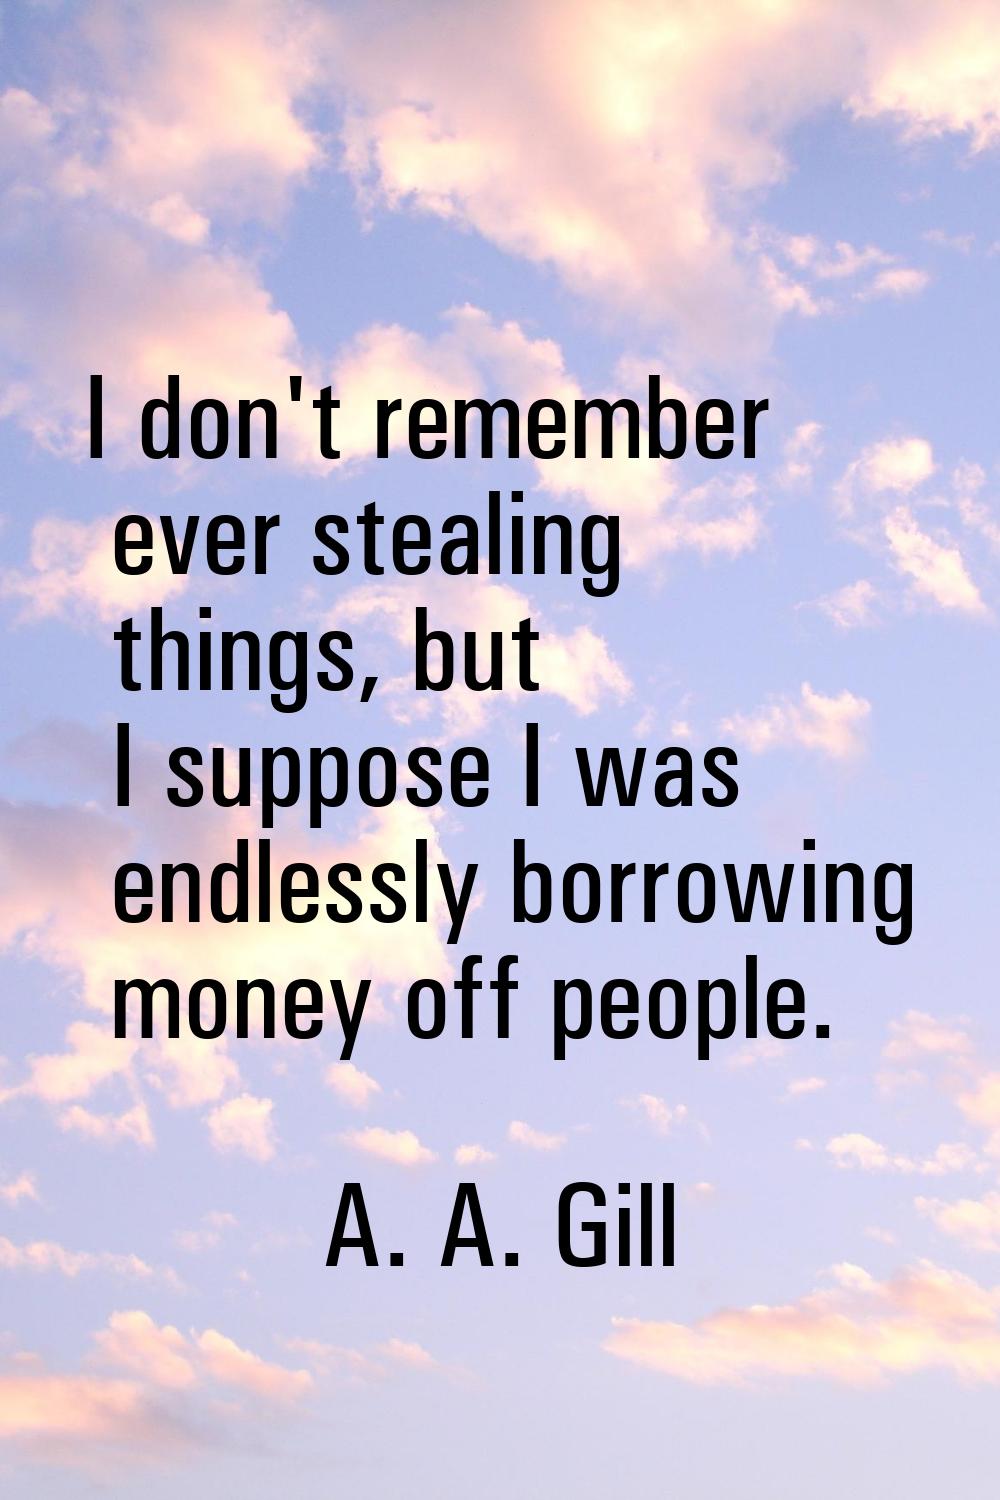 I don't remember ever stealing things, but I suppose I was endlessly borrowing money off people.